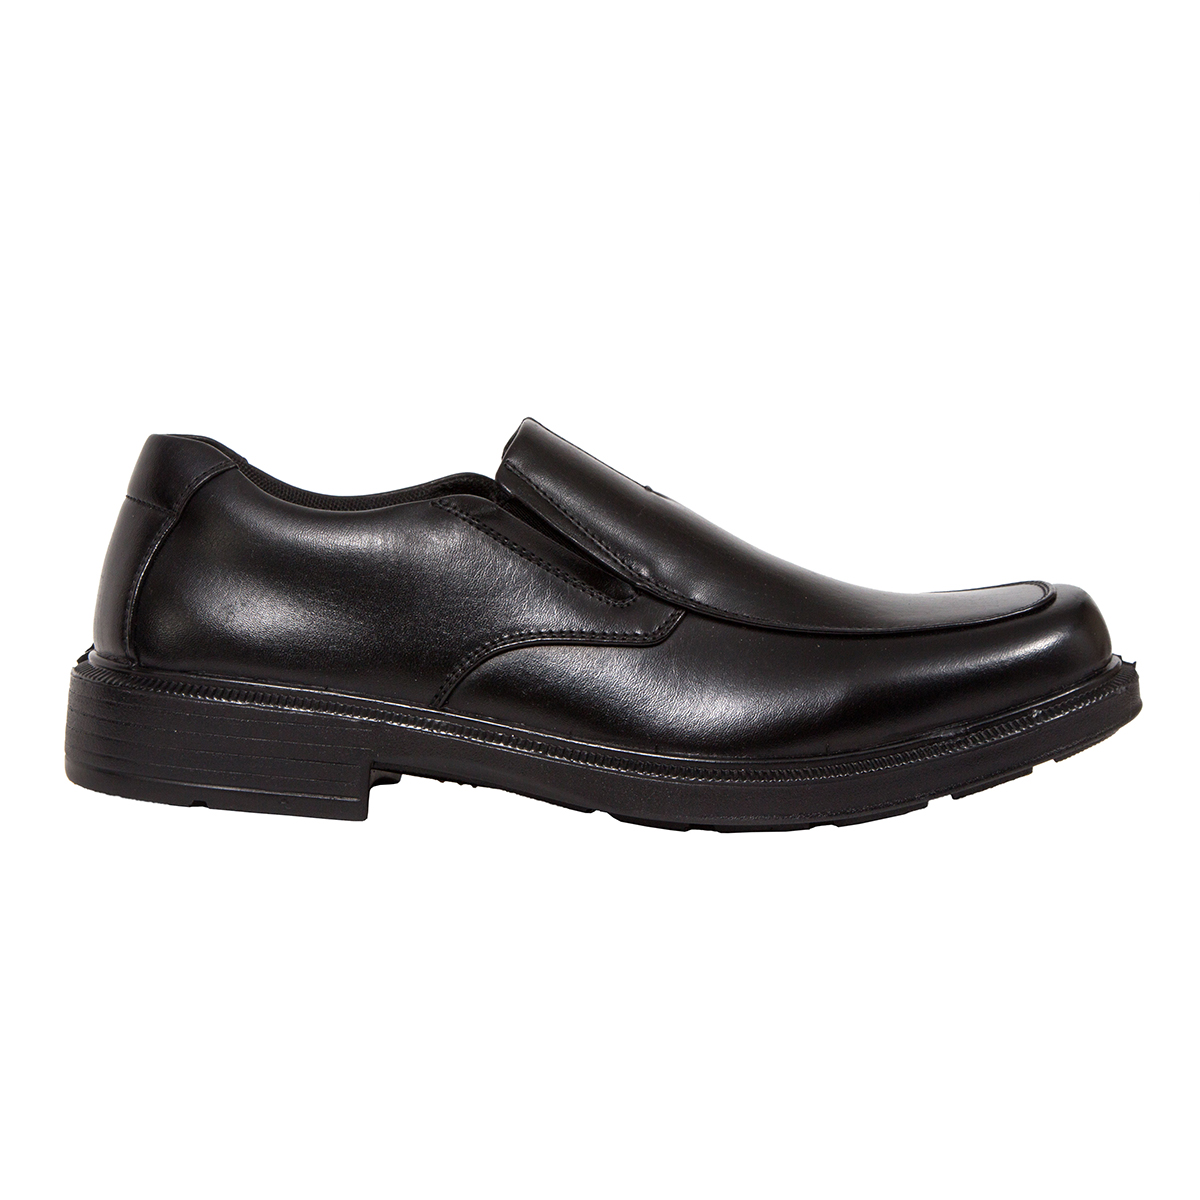 Mens Deer Stags(R) Coney Dress Loafers